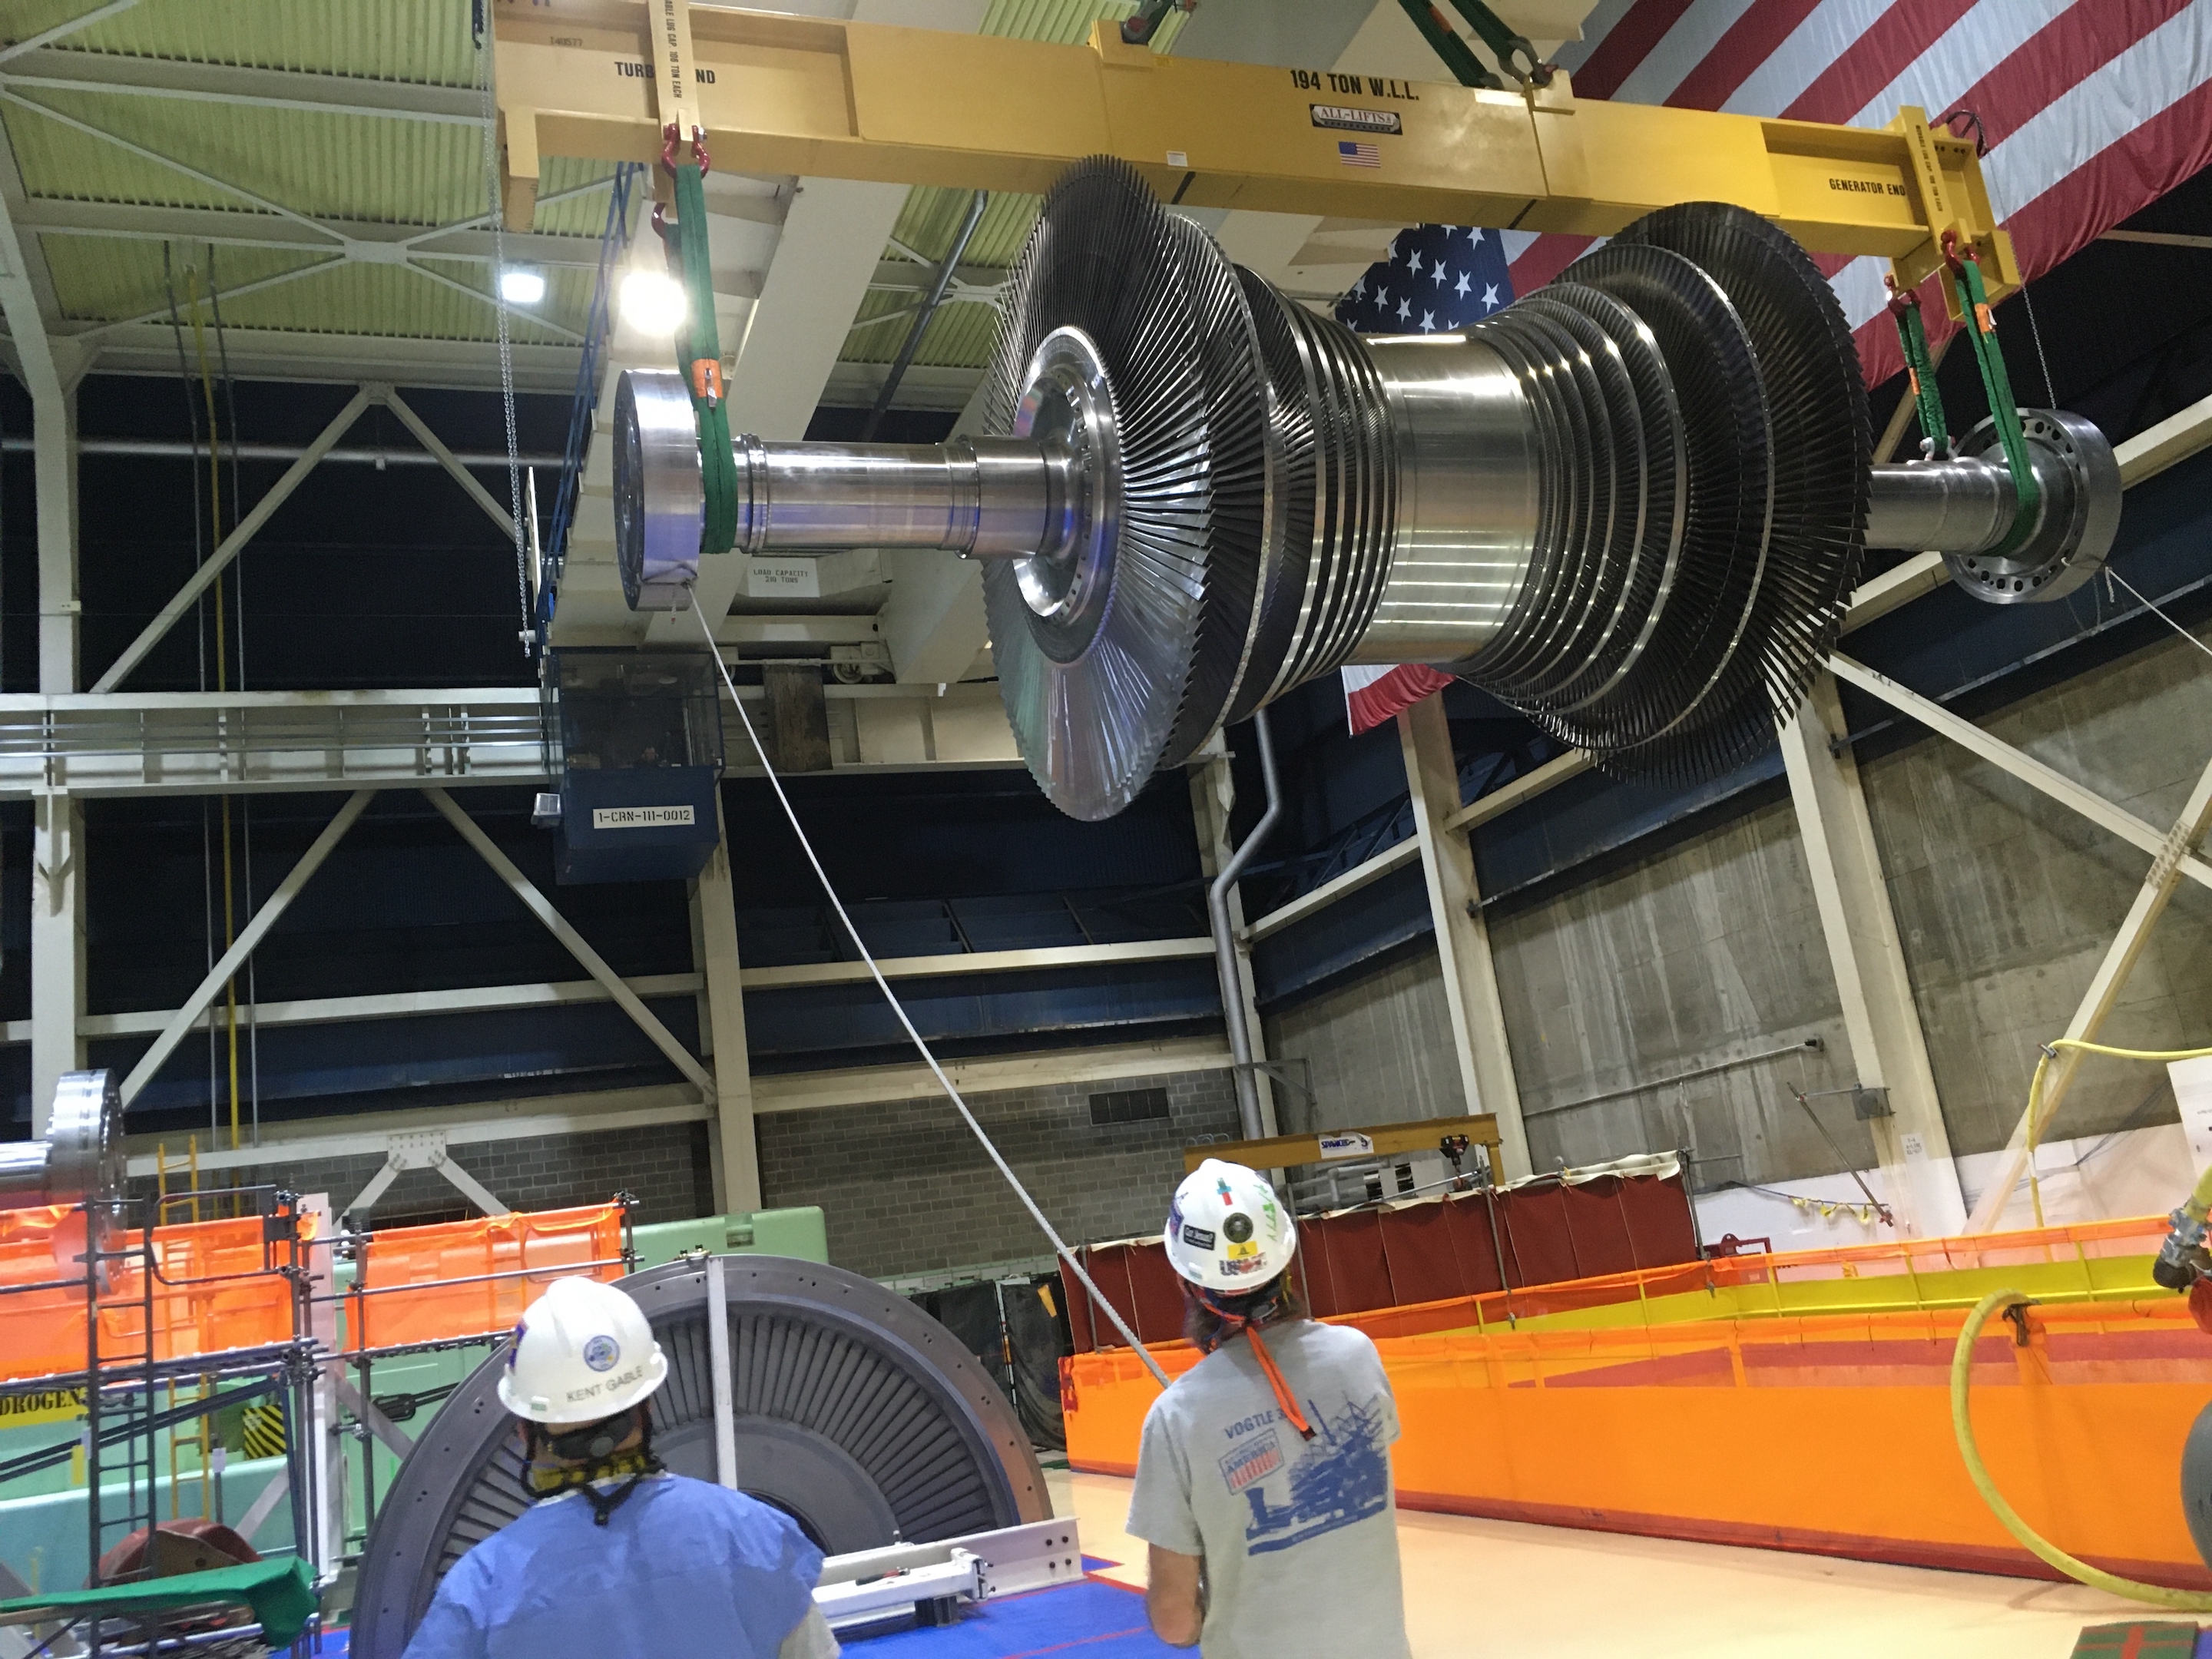 workers replacing the Unit 2 LP turbine rotor